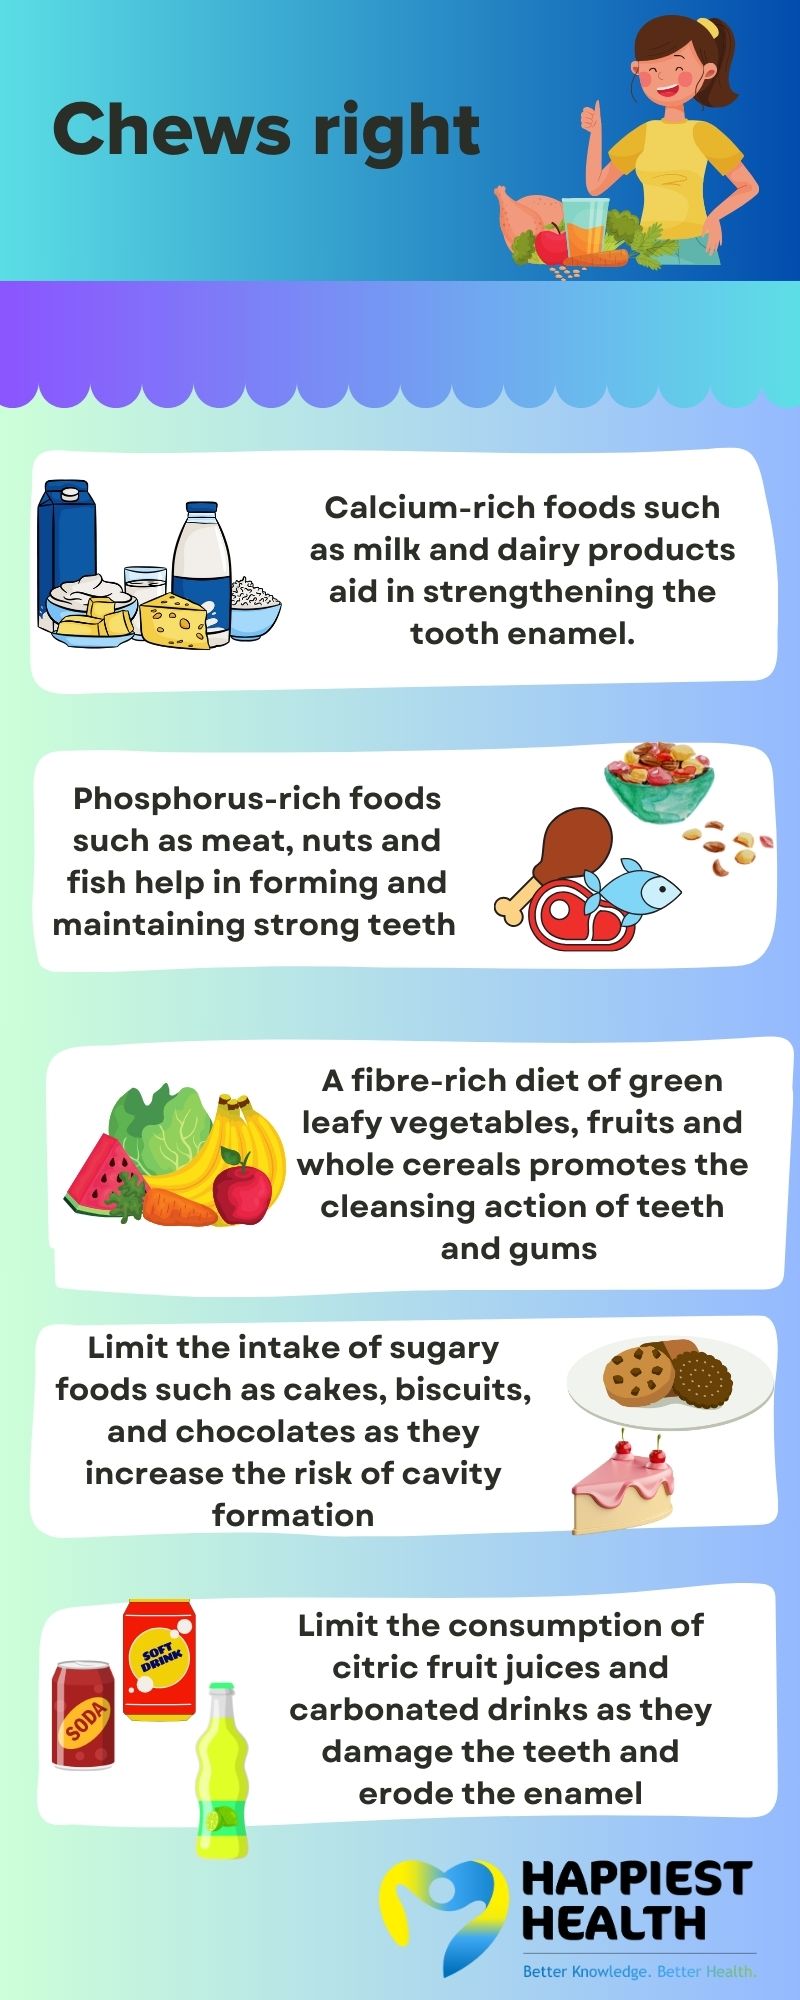 Food habits and oral health